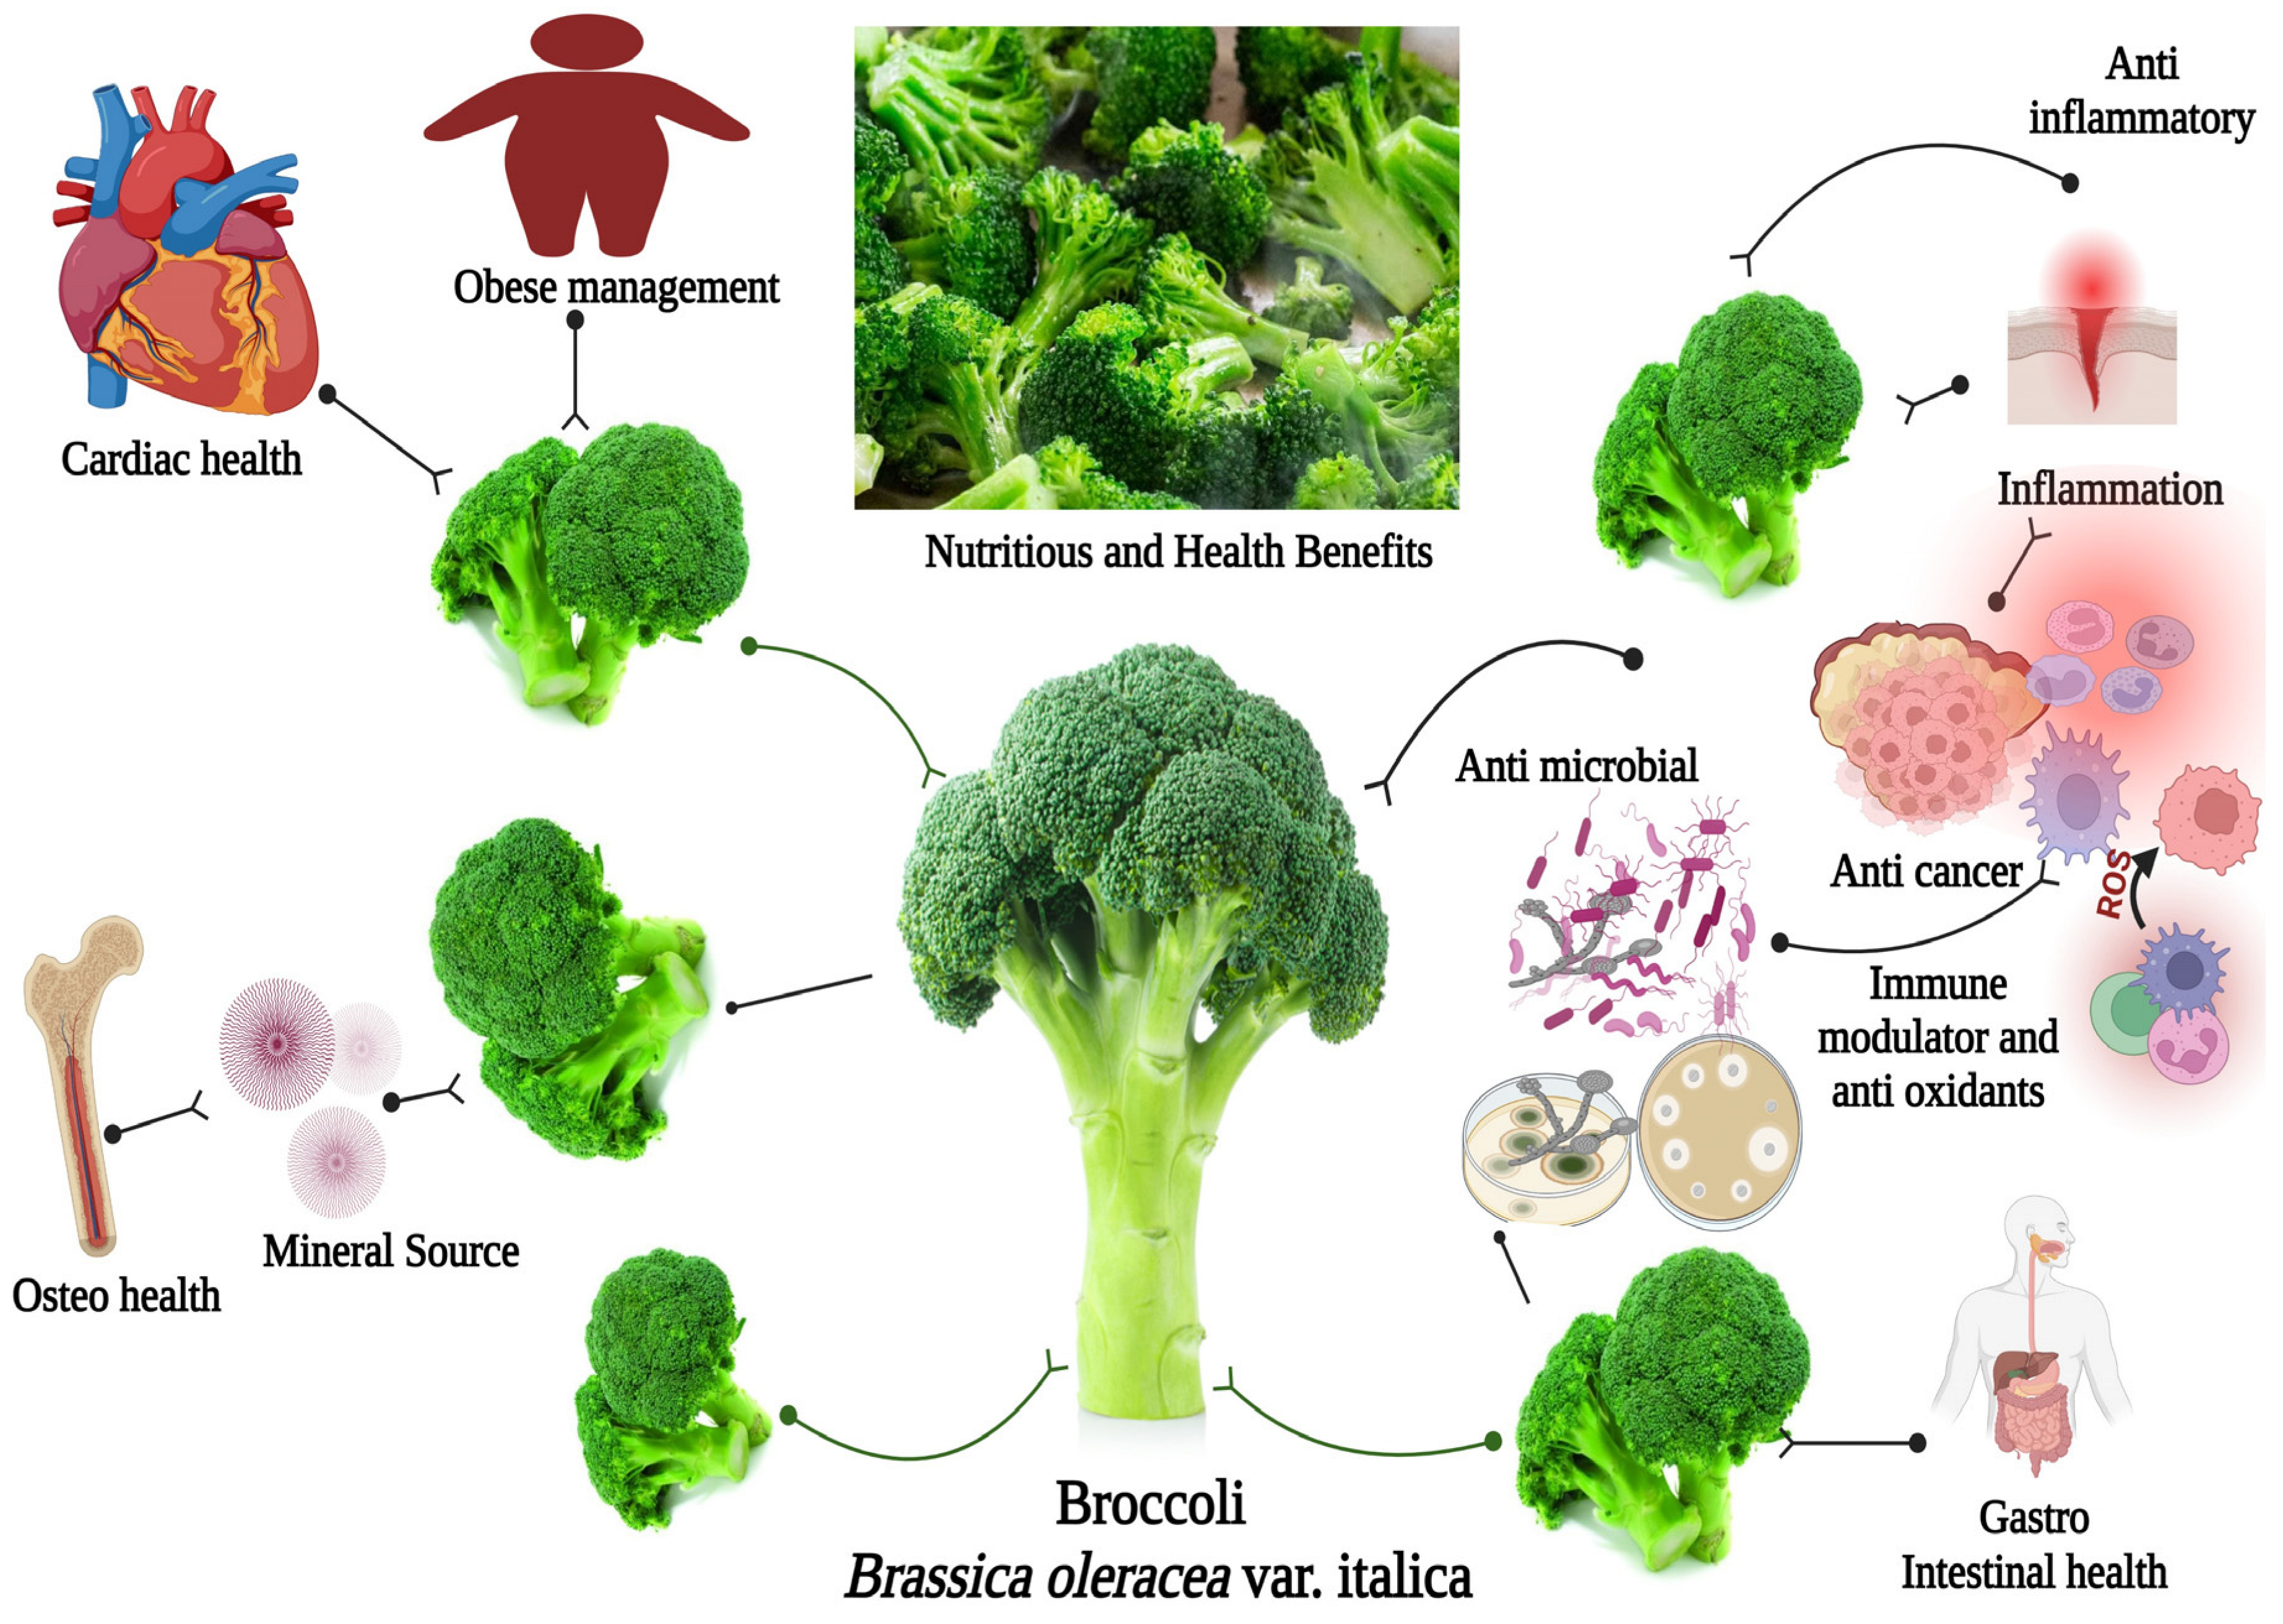 Its Review In-Depth Abilities, Attributes, Antimicrobial Nutritional | Antibiotics Health: Anti-inflammatory An Broccoli: and Multi-Faceted of Free | A for Full-Text Properties Vegetable